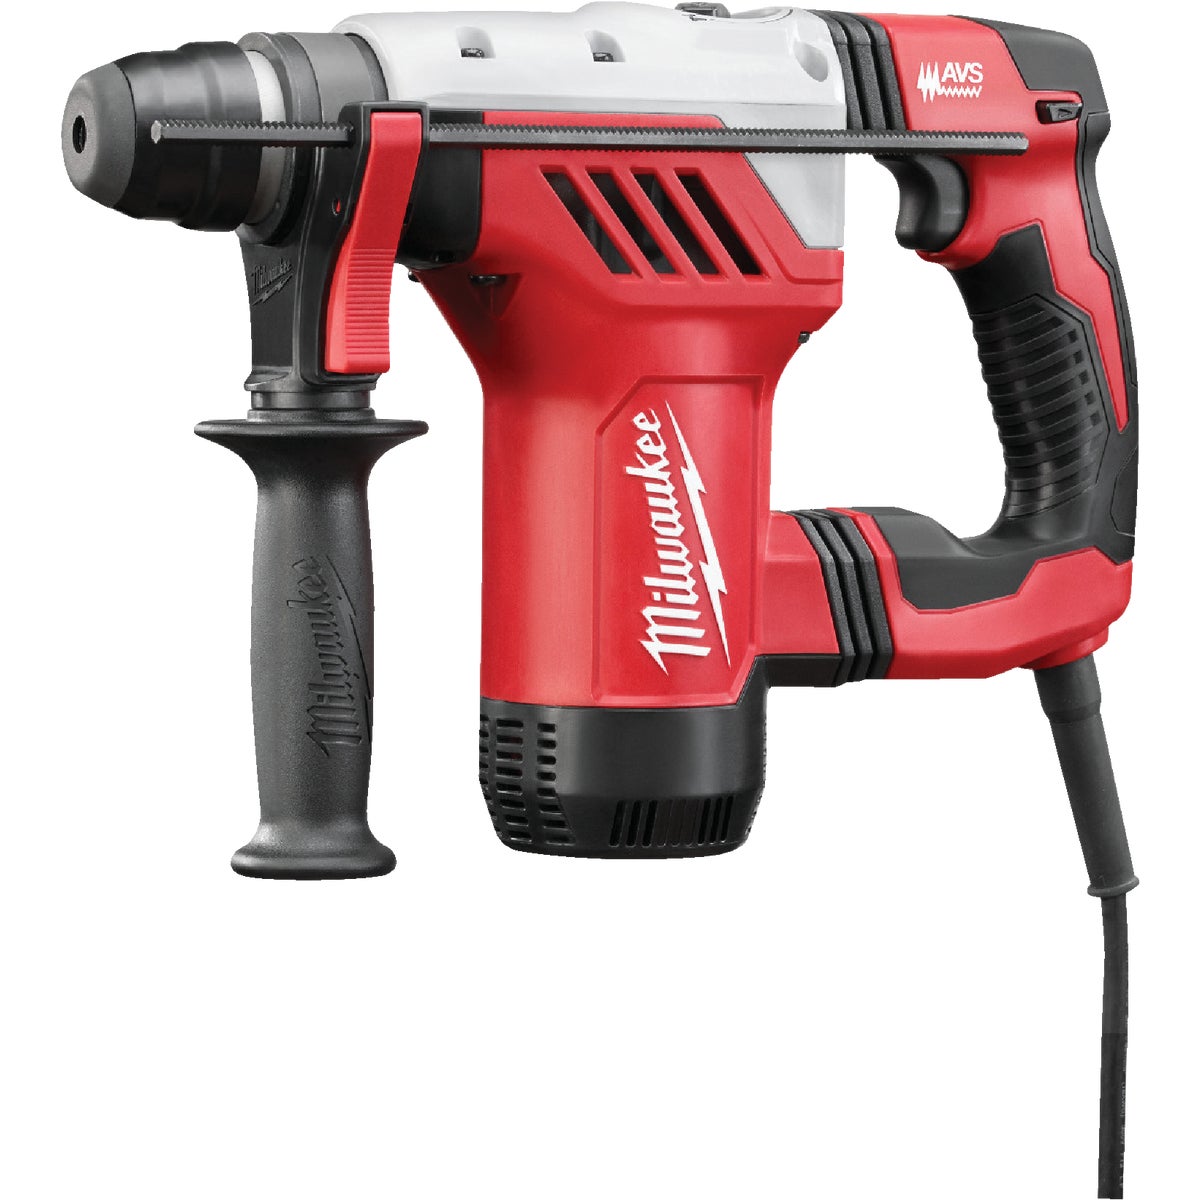 Milwaukee 1-1/8 In. SDS-Plus Keyless 8.0-Amp Electric Hammer Drill